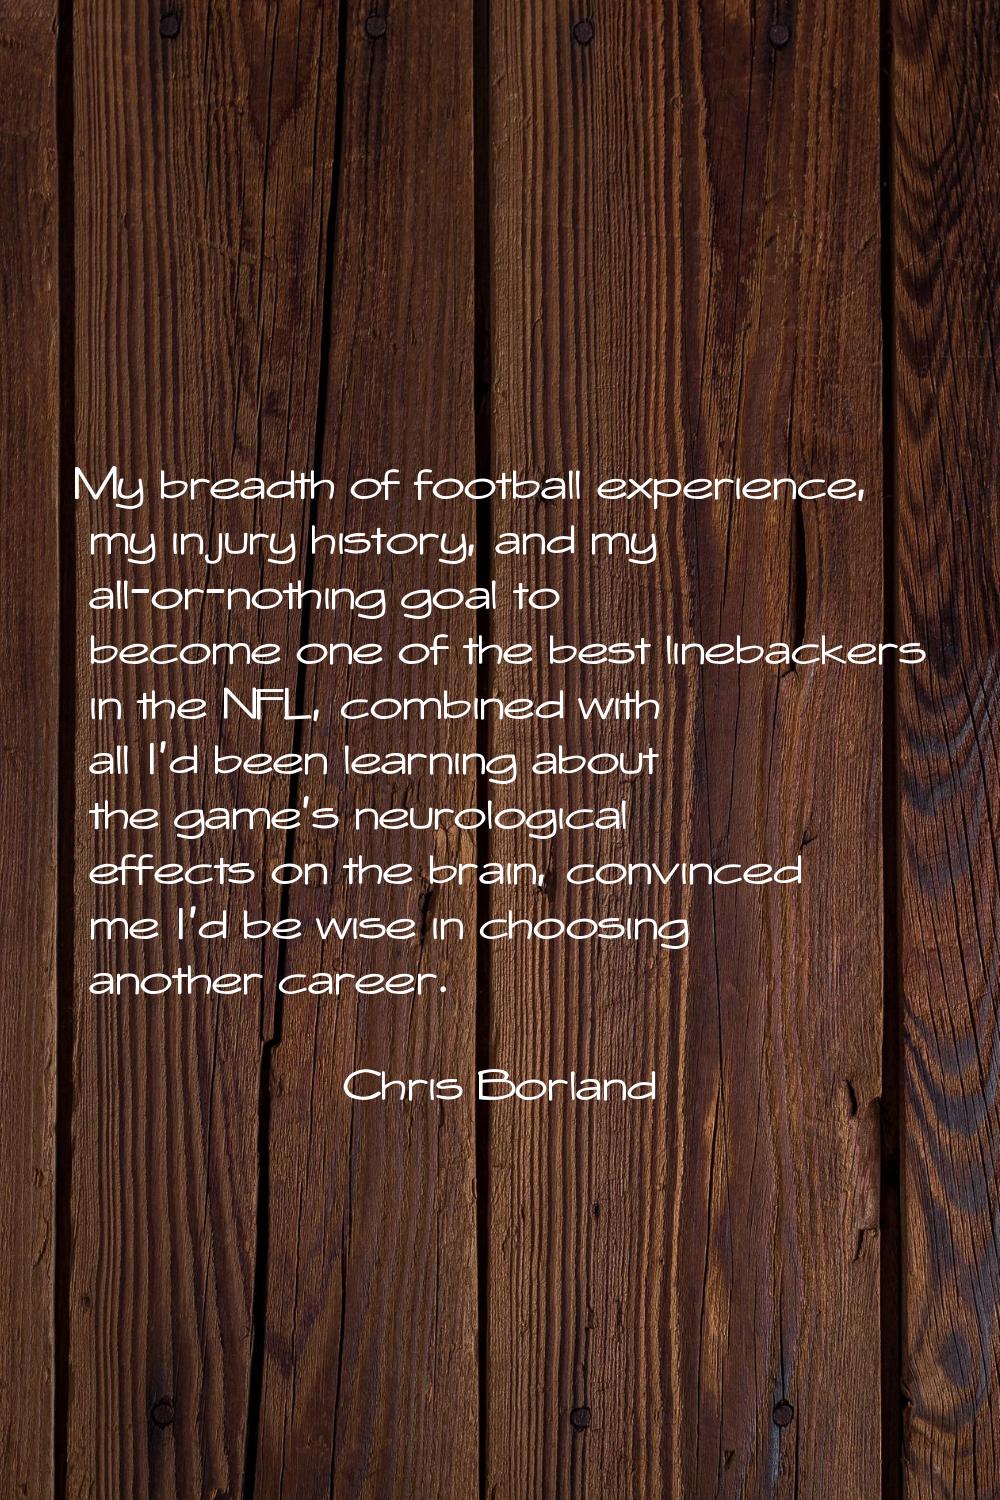 My breadth of football experience, my injury history, and my all-or-nothing goal to become one of t